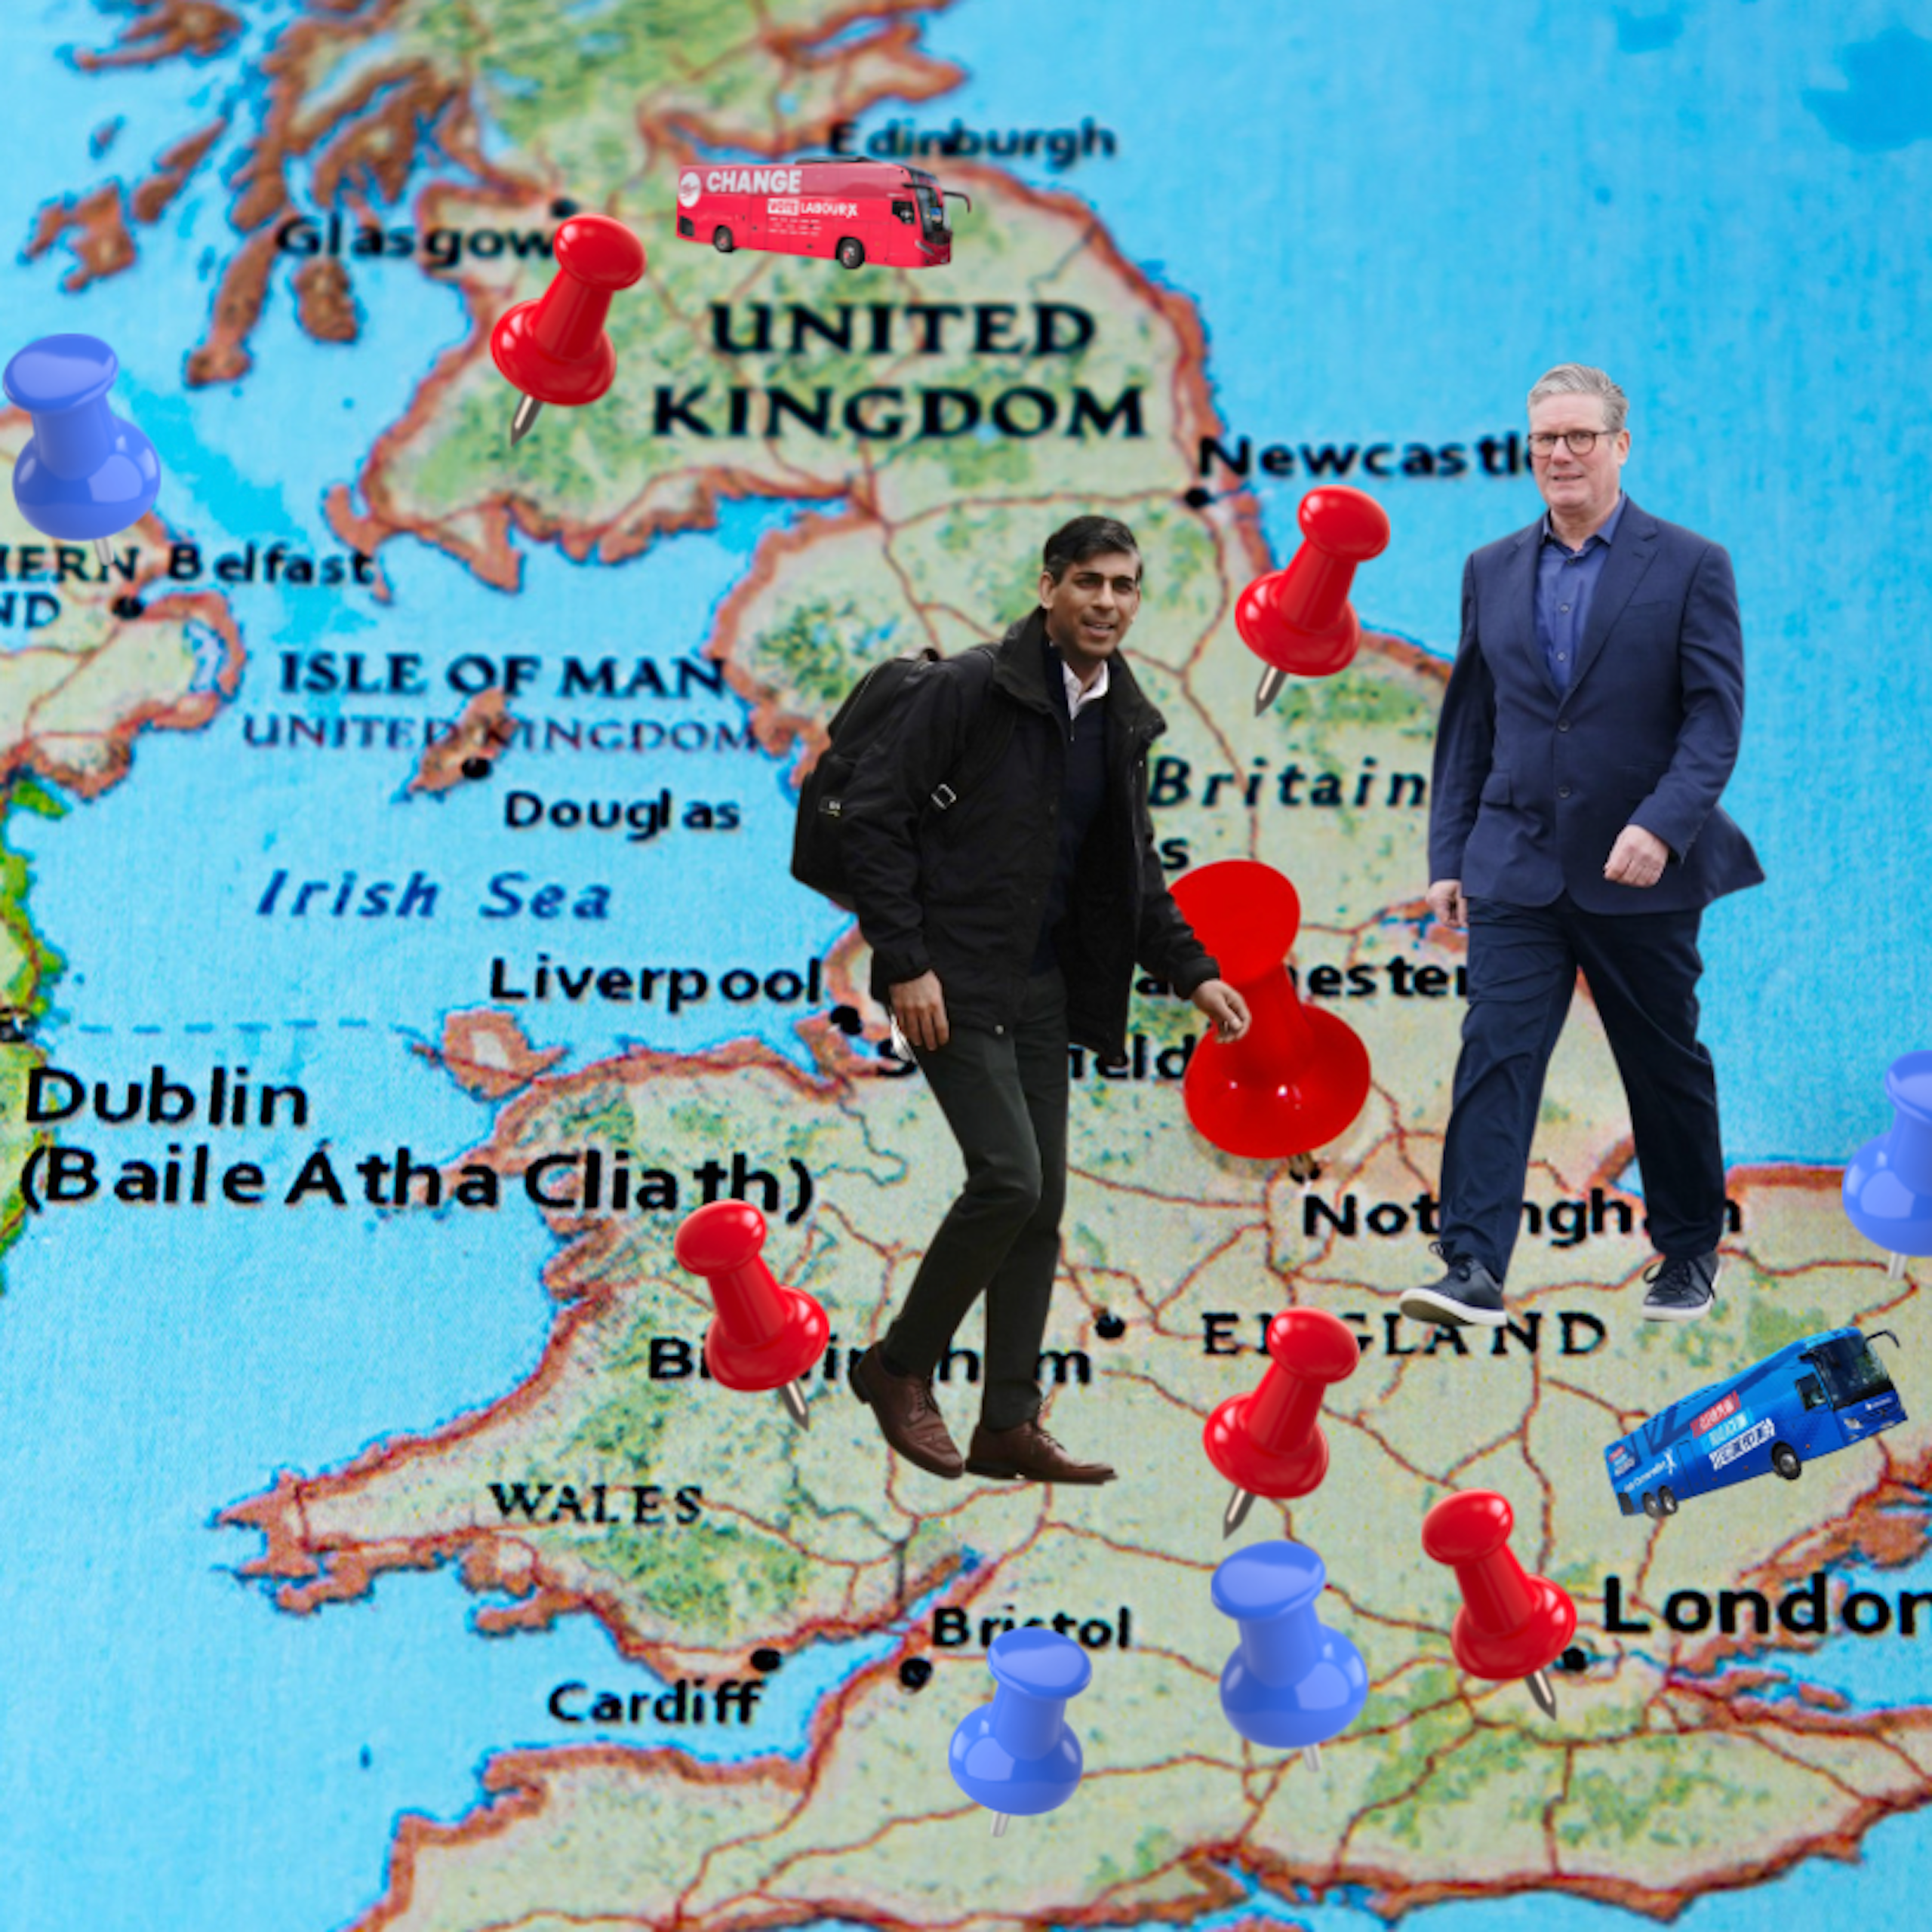 Rishi Sunak and Keir Starmer walk across a map of the UK with blue and red pins in it.